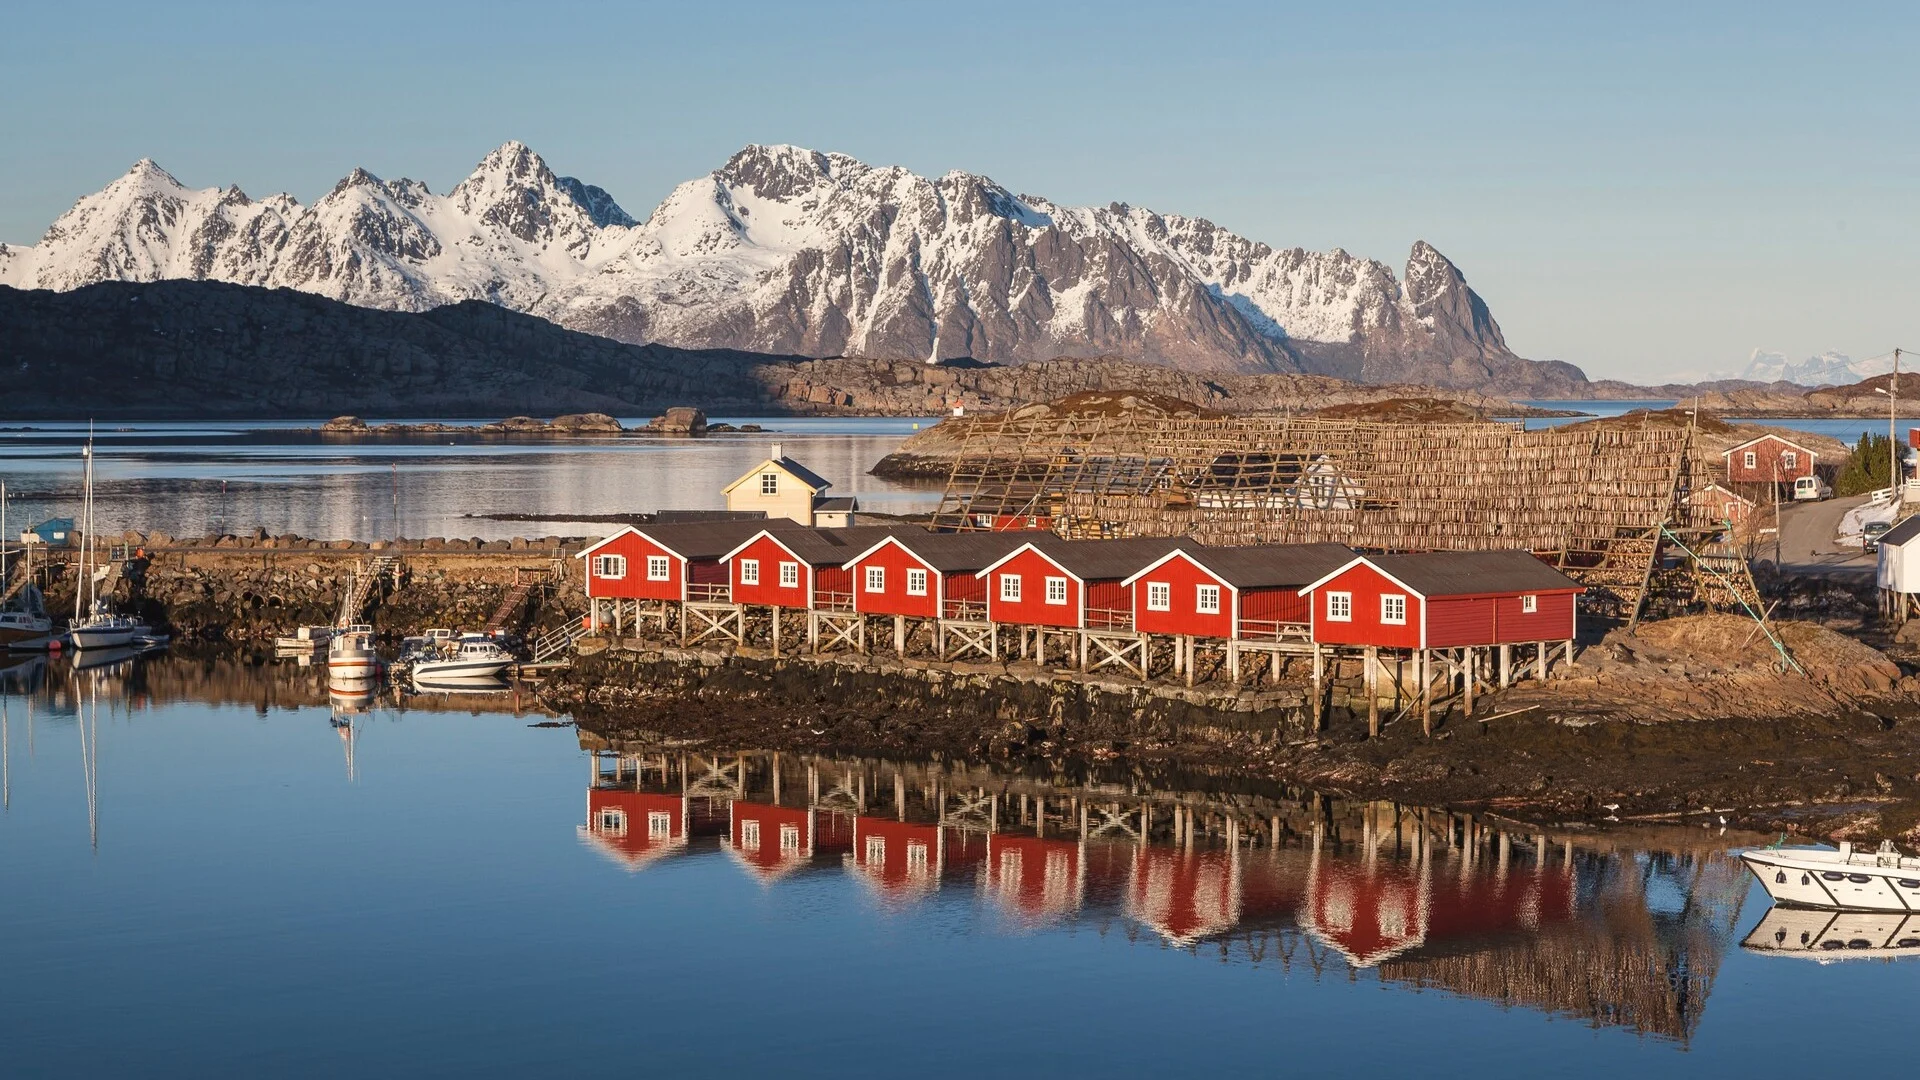 A group of red rorbuer (fishing houses) on stilts in Svinøya in the Lofoten Islands in Norway